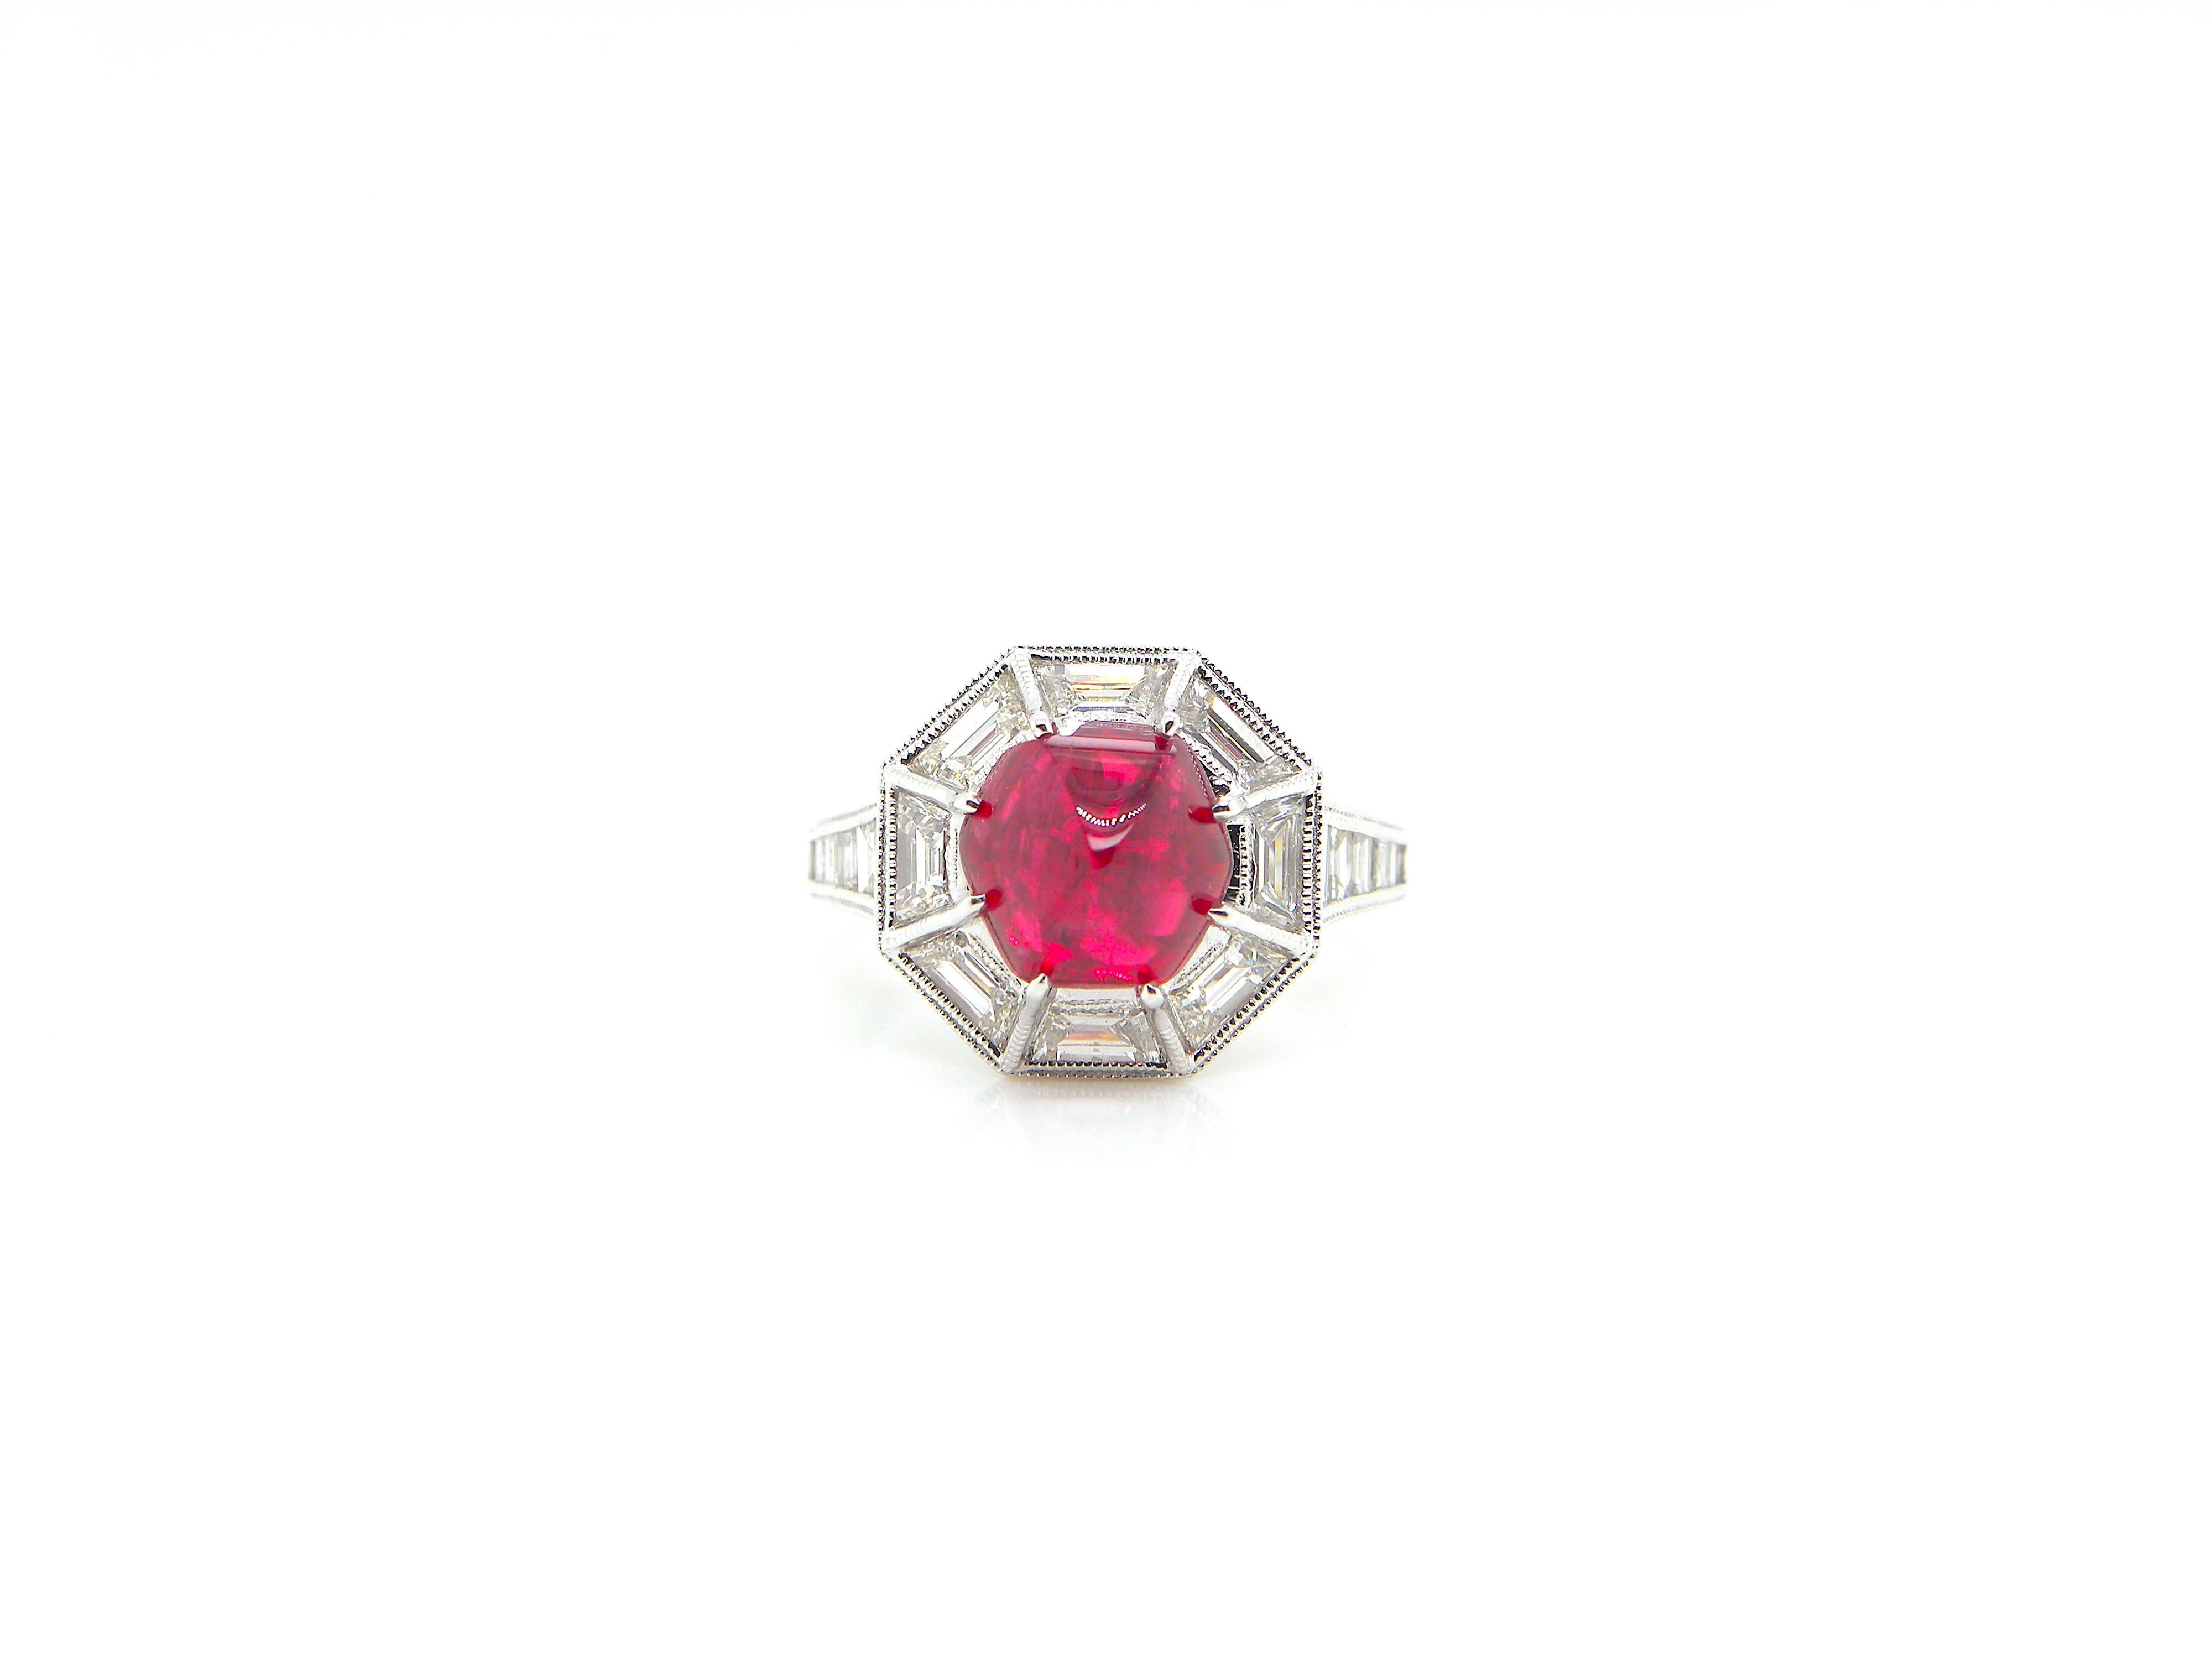 3.04 Carat GIA Certified Burma No Heat Vivid Red Spinel and White Diamond Ring:

A superb ring, it features a 3.04 carat GIA certified Burmese unheated octagon sugarloaf-cut vivid red spinel surrounded by white baguette diamonds weighing 1 carat